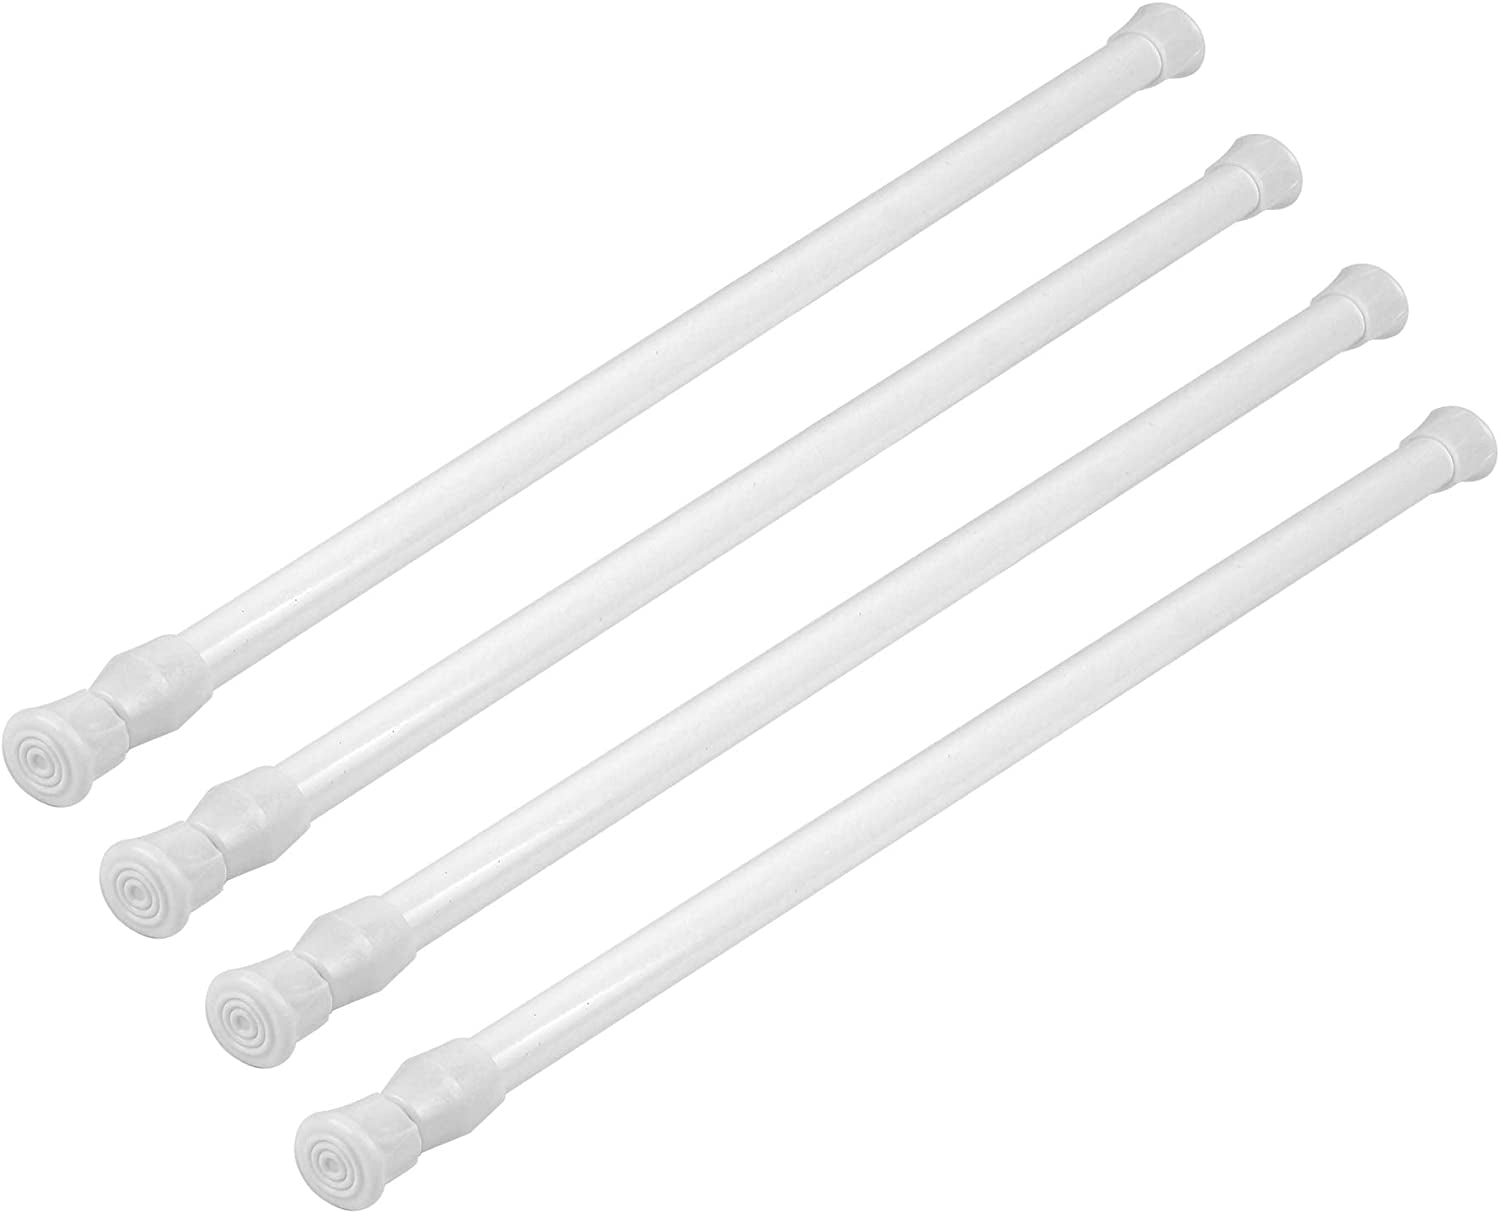 4 Pack Spring Tension Rods Curtain Rod Adjustable Cupboard Bars Extendable Width 15.7 to 28 Inches